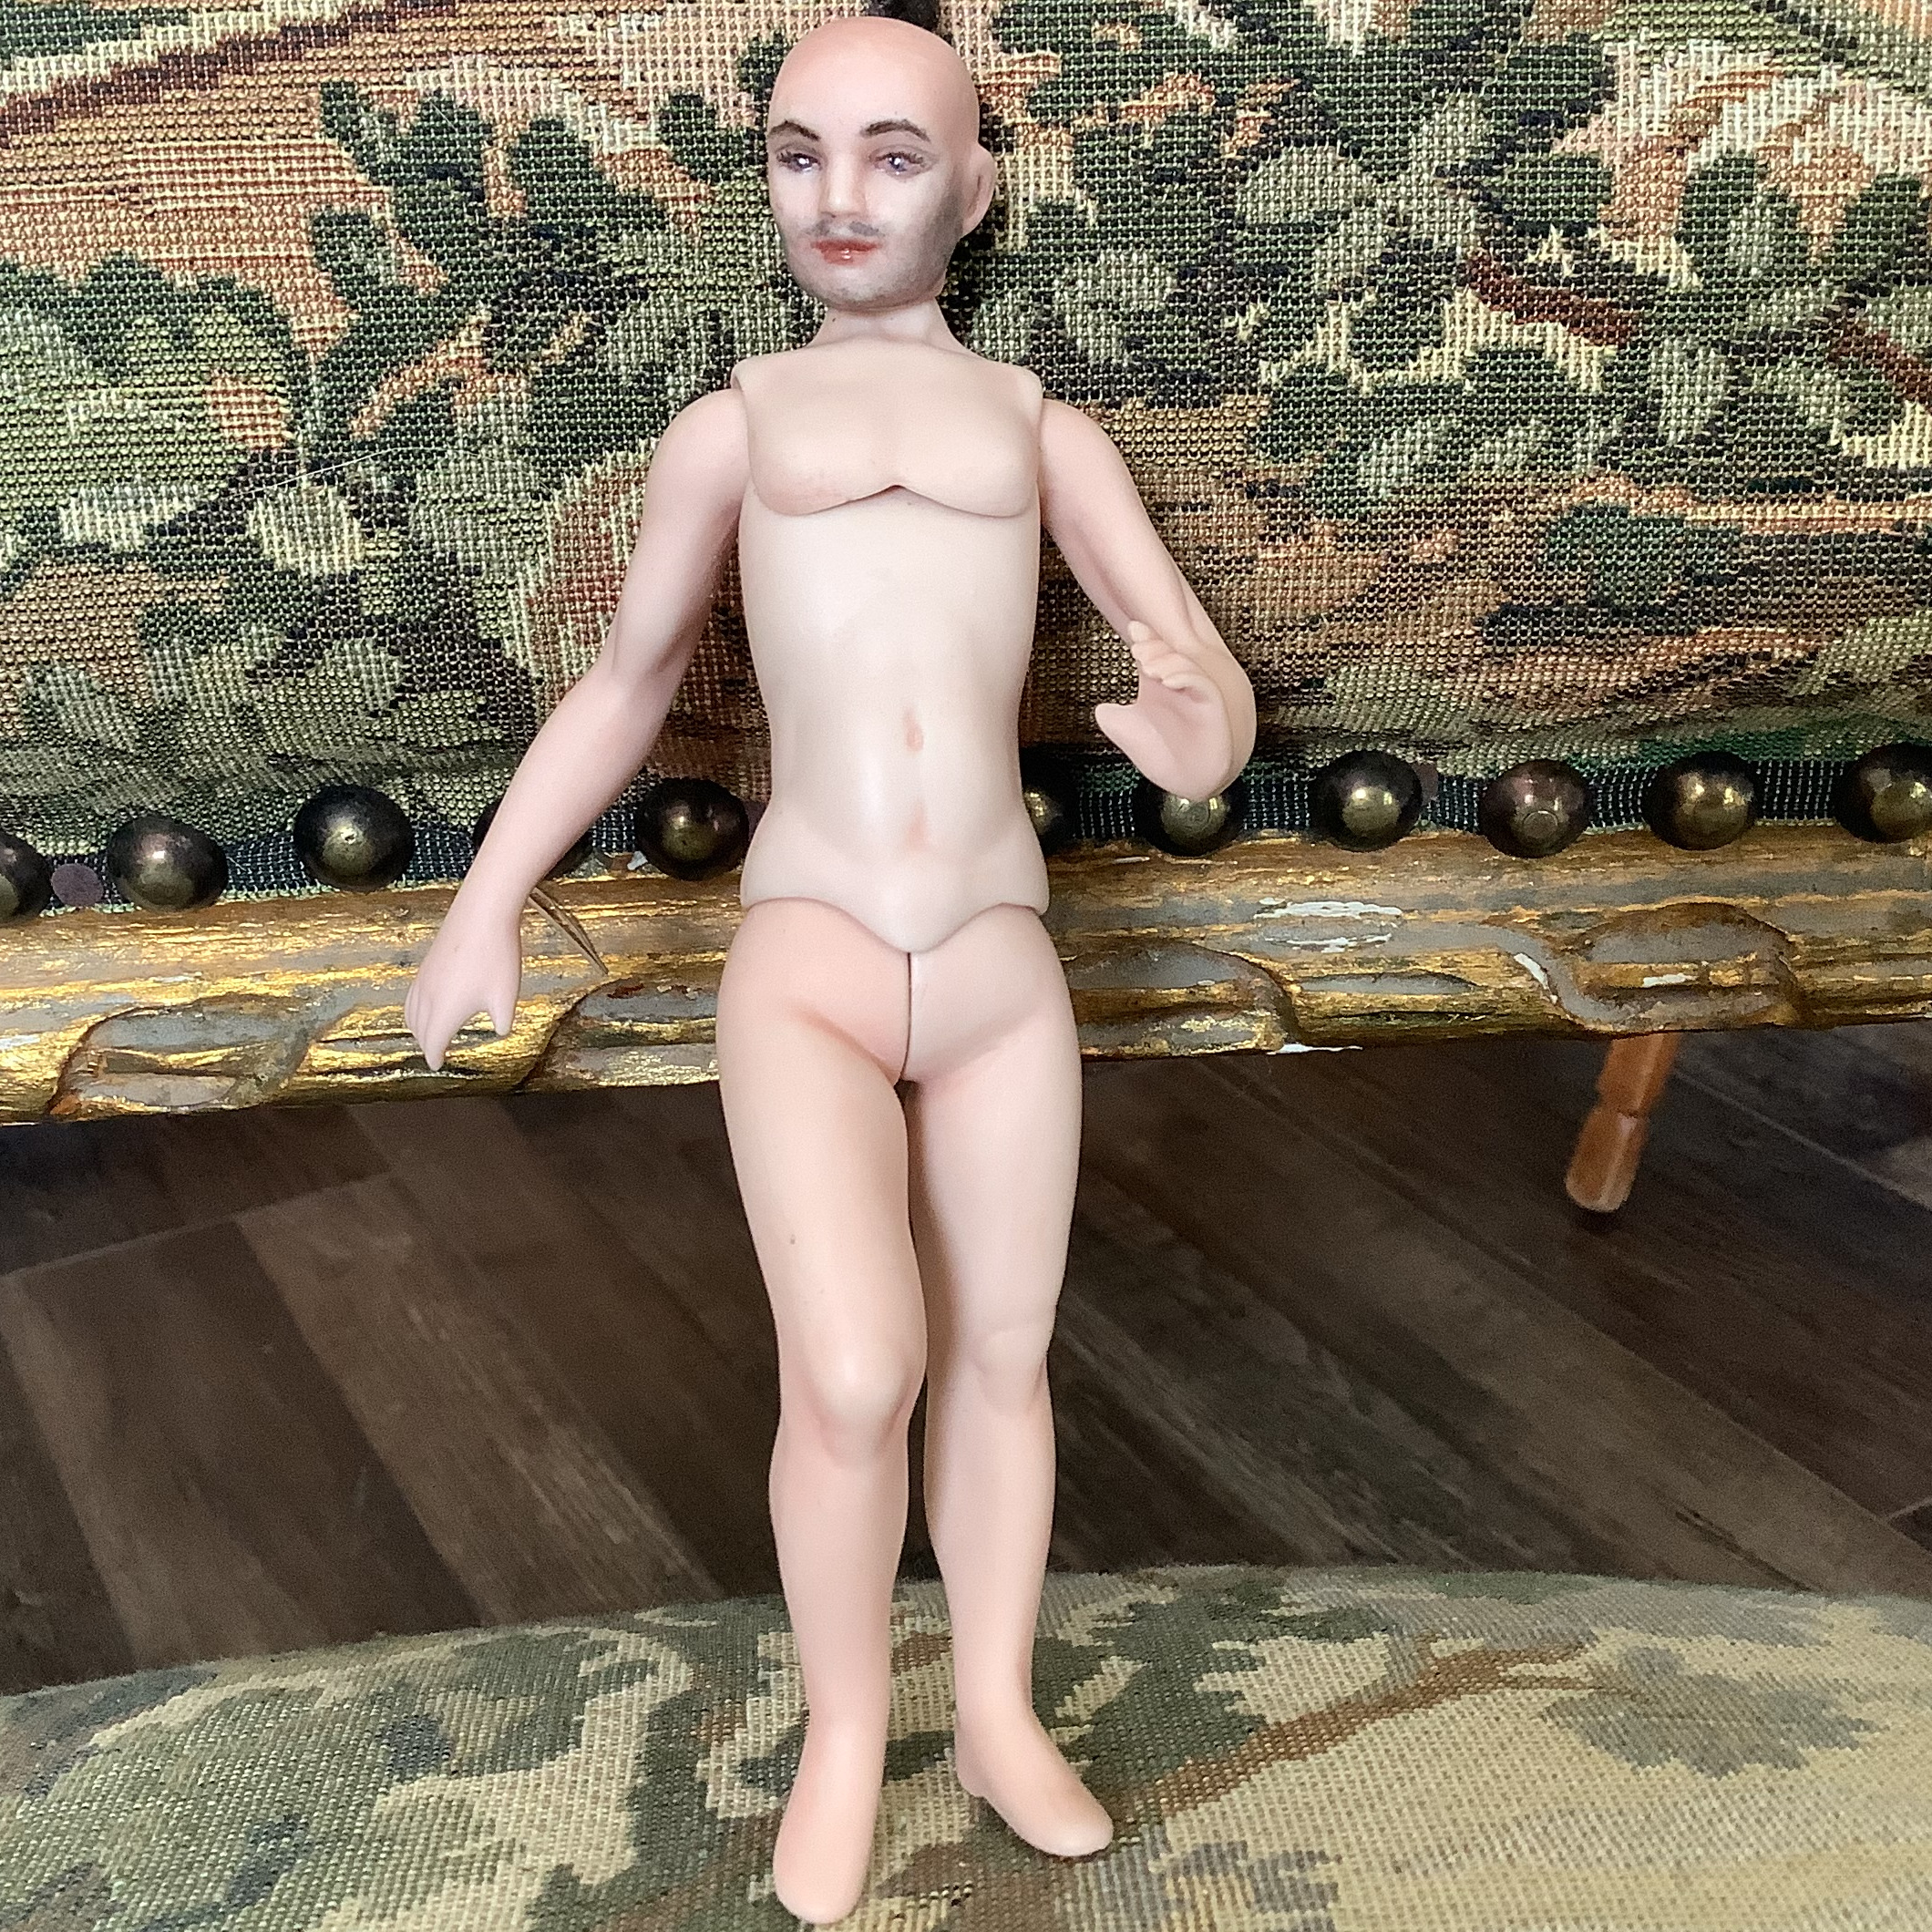 Nude male doll with painted five o'clock shadow and body stringing protruding from crown of head